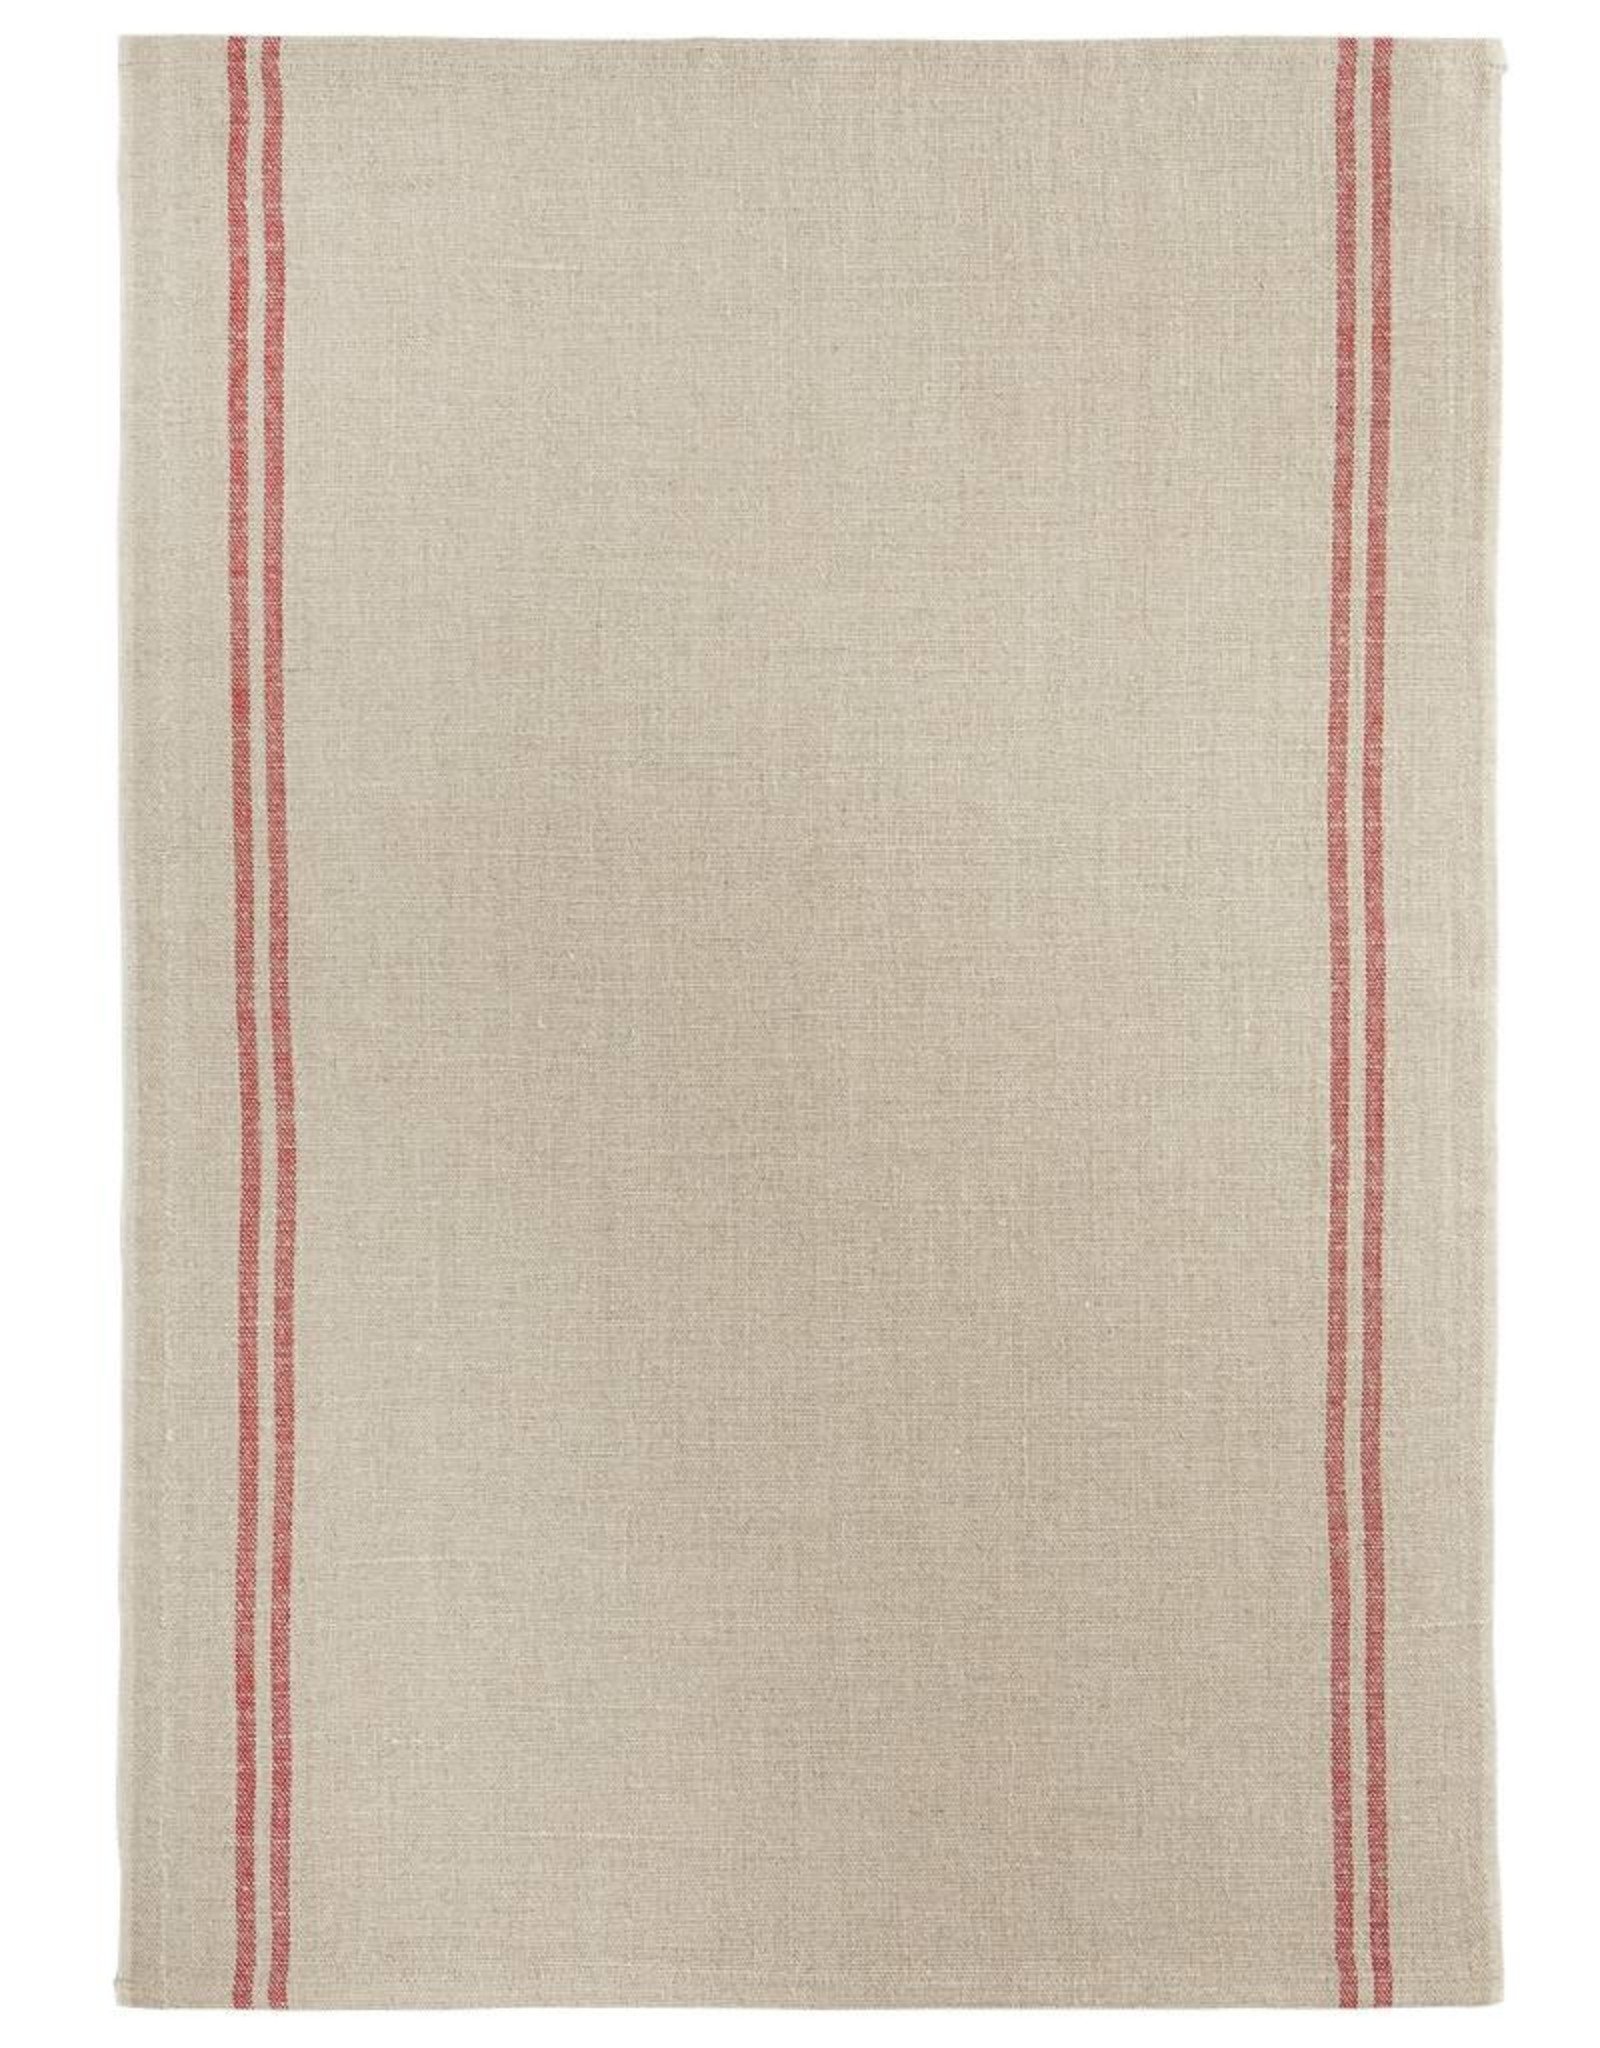 Lovely  Large Antique French Linen Torchon Tea Kitchen Towel  Mono AG Red Stripe 